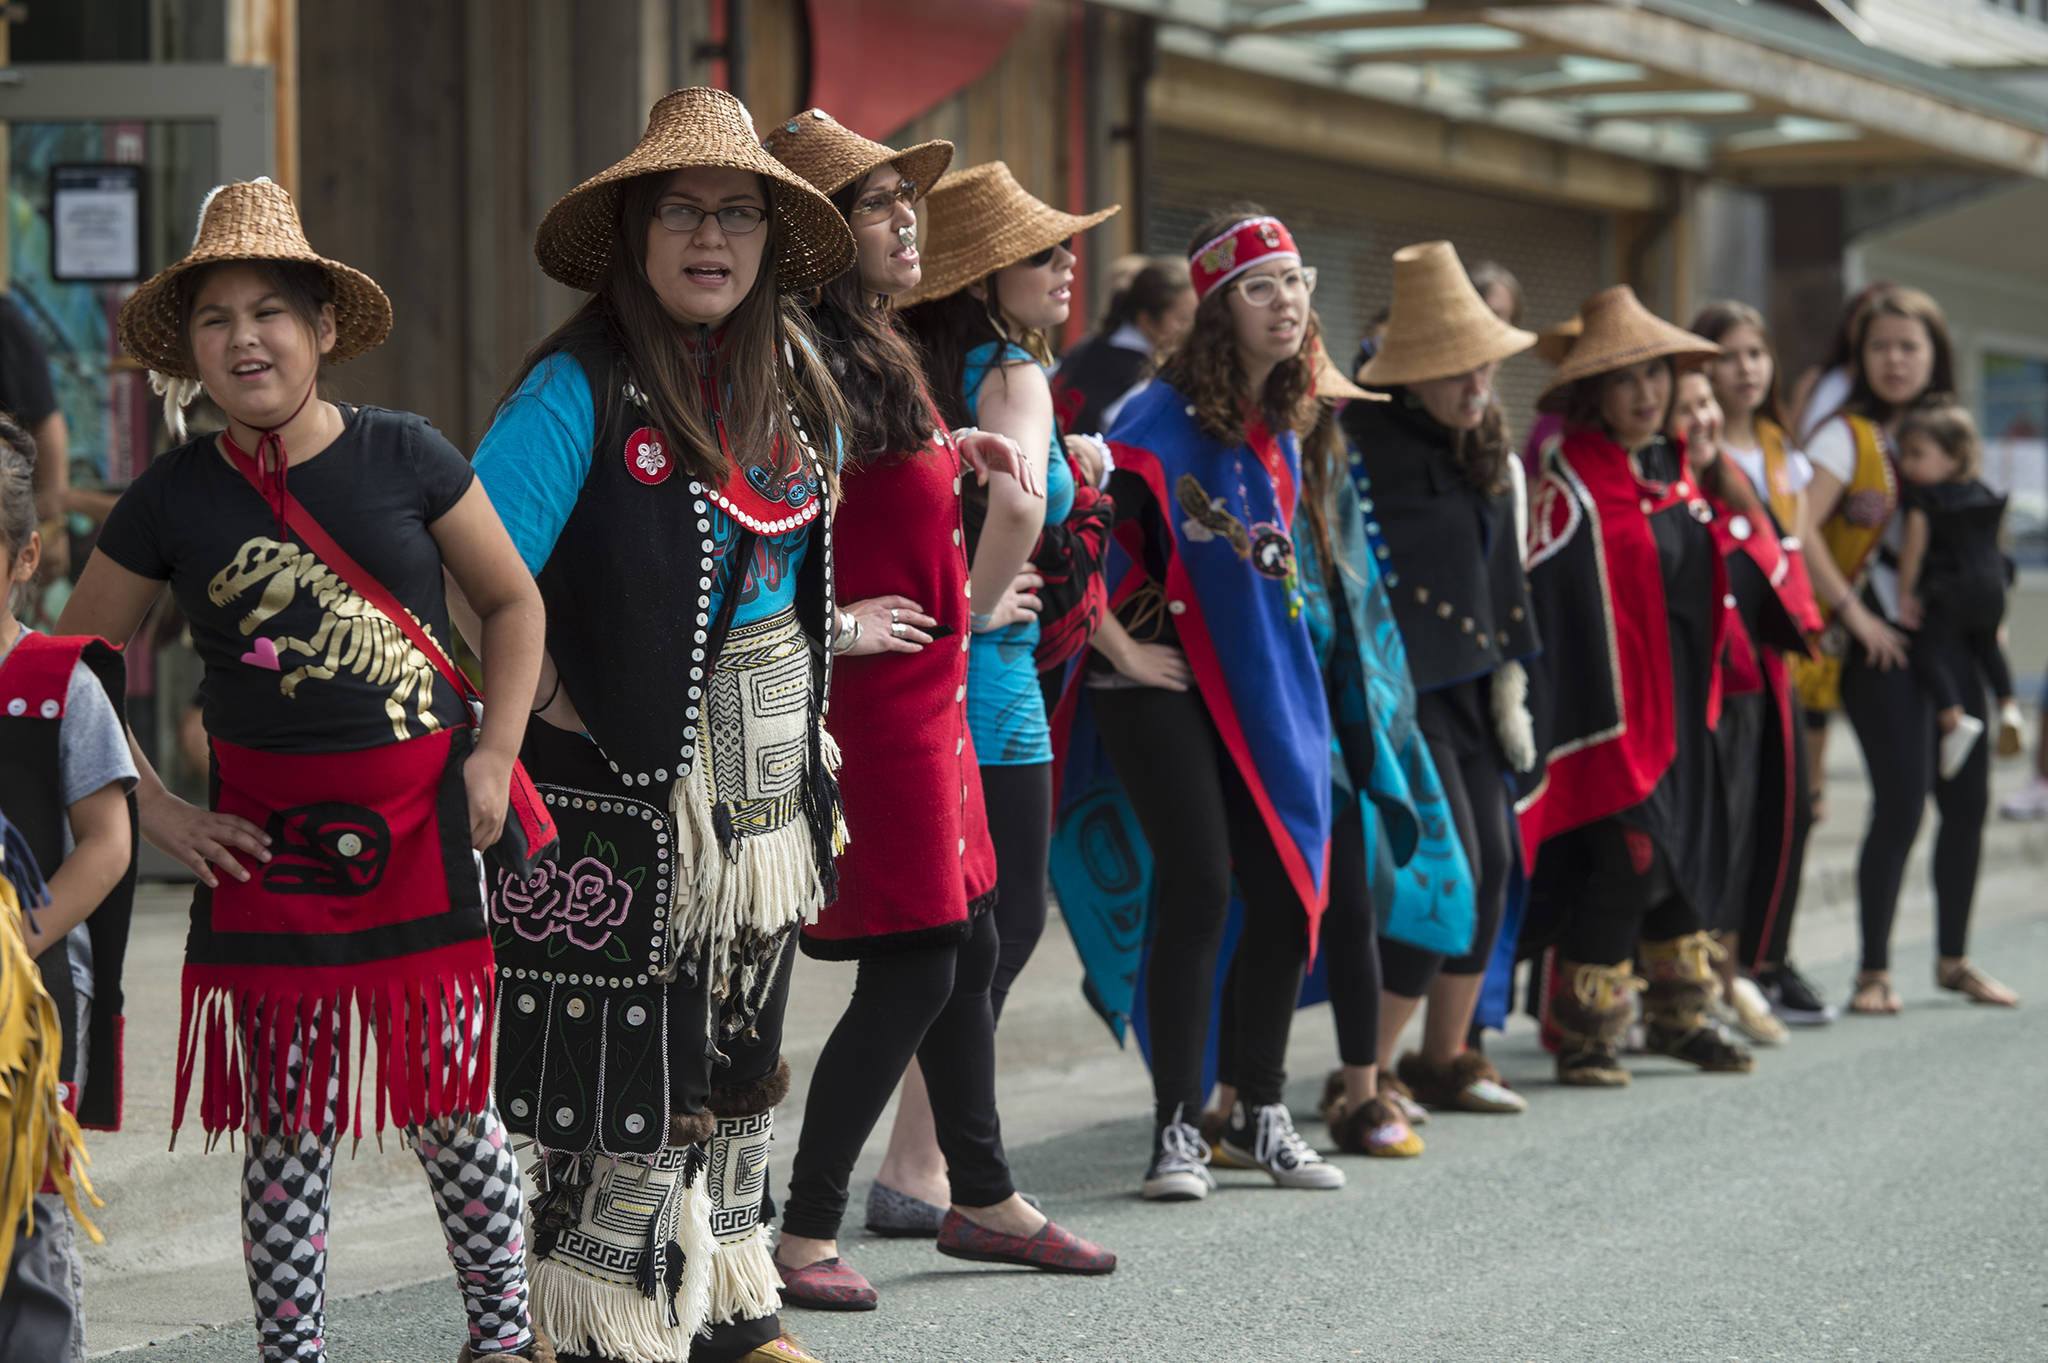 Members of the Woosh ji .een Dance Group perform during an unveiling ceremony for three bronze house posts in front of the Walter Soboleff Center by Sealaska Heritage Institute on Sunday, Aug. 26, 2018. (Michael Penn | Juneau Empire)